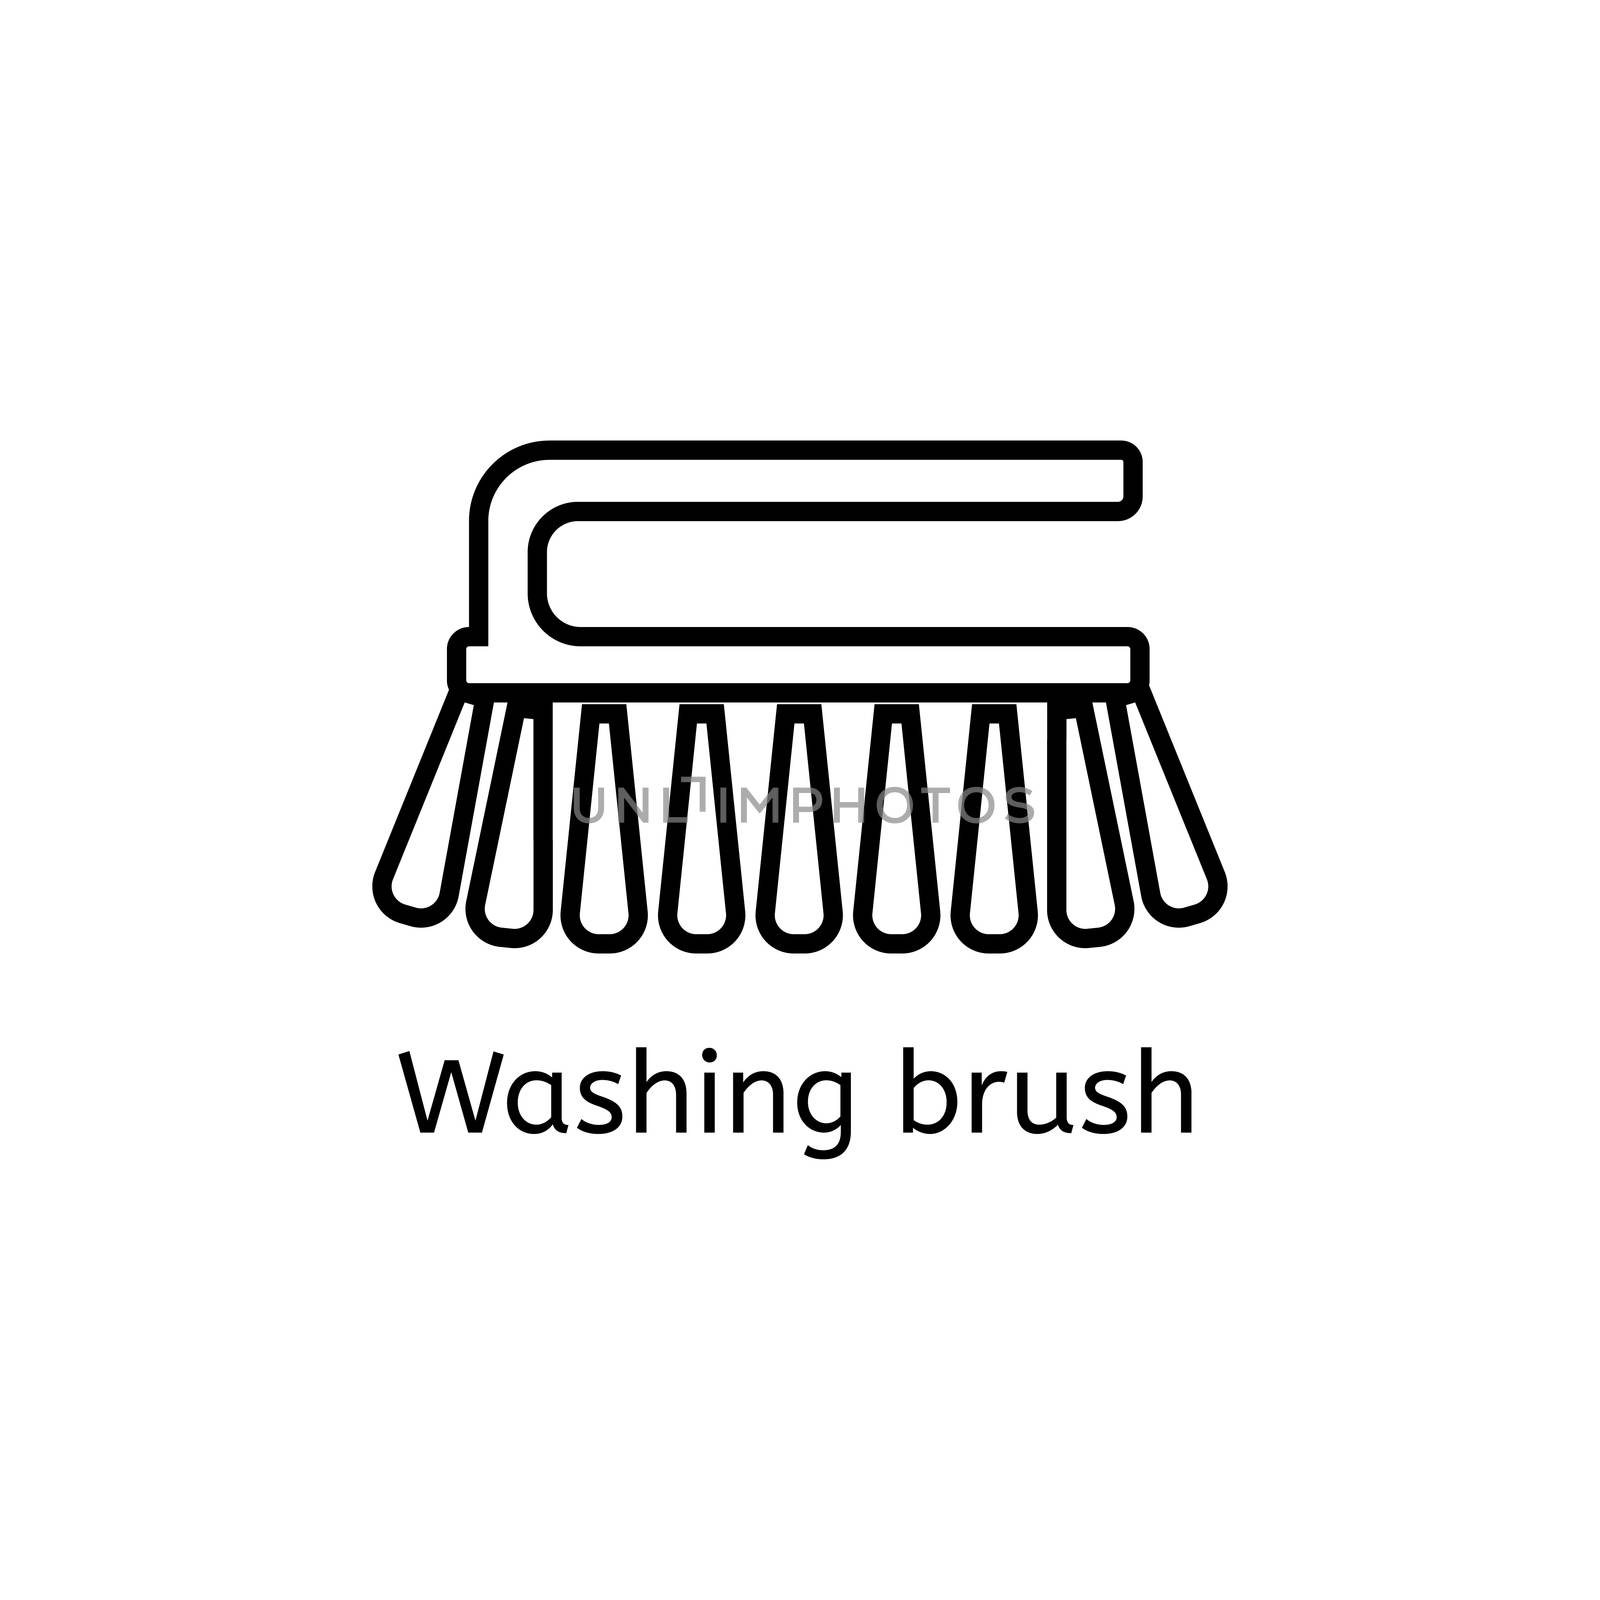 Cleaning brush simple line icon. Washing brush thin linear signs. Toilet cleaning simple concept for websites, infographic, mobile applications. by Elena_Garder